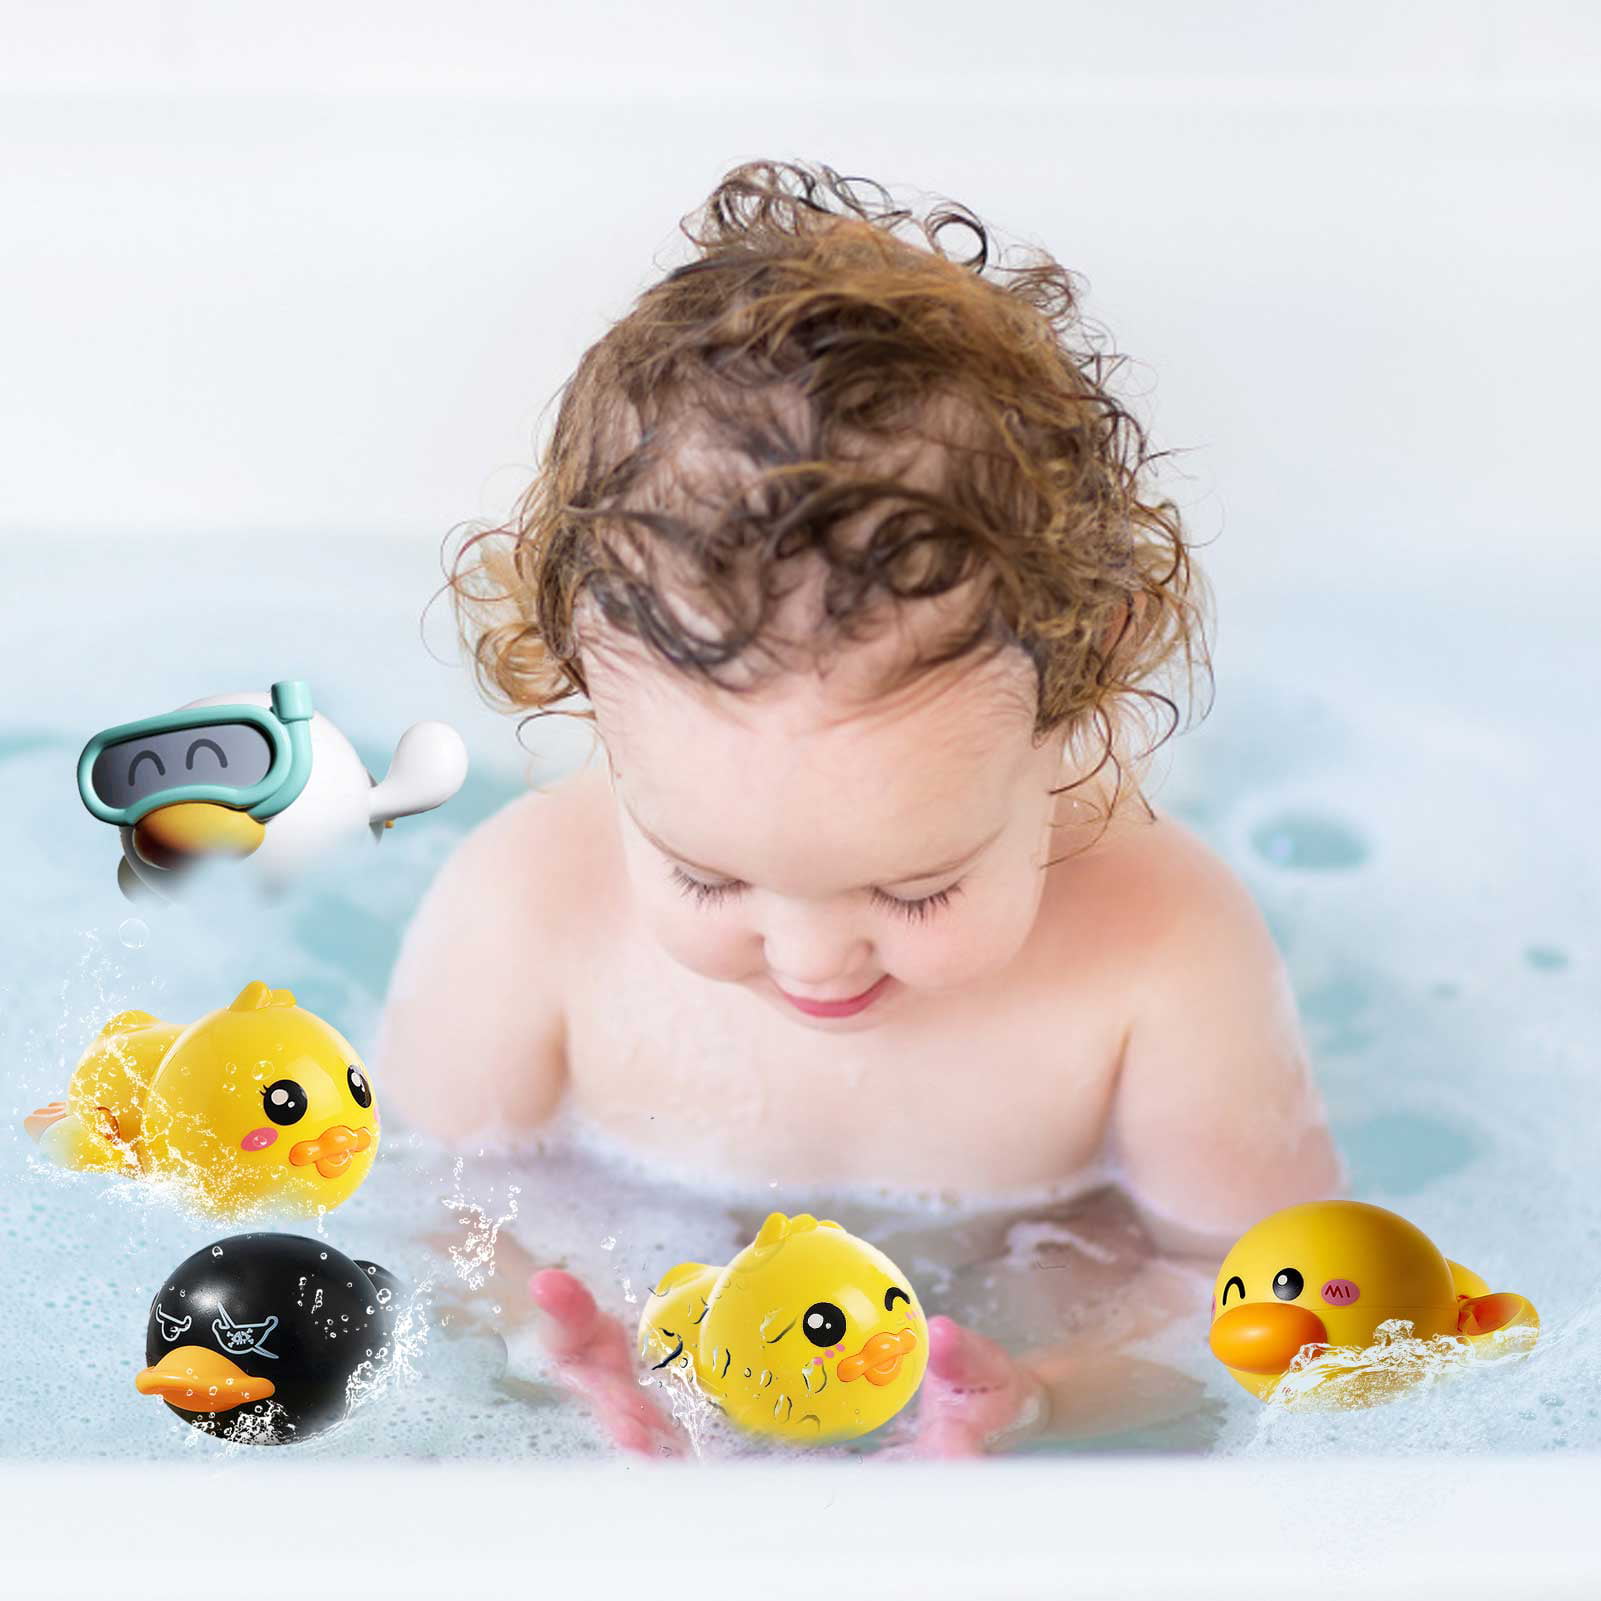 2Pcs Childs Kids Water Starfish Floating Bath Time Fun Toys Education ToysPin TO 